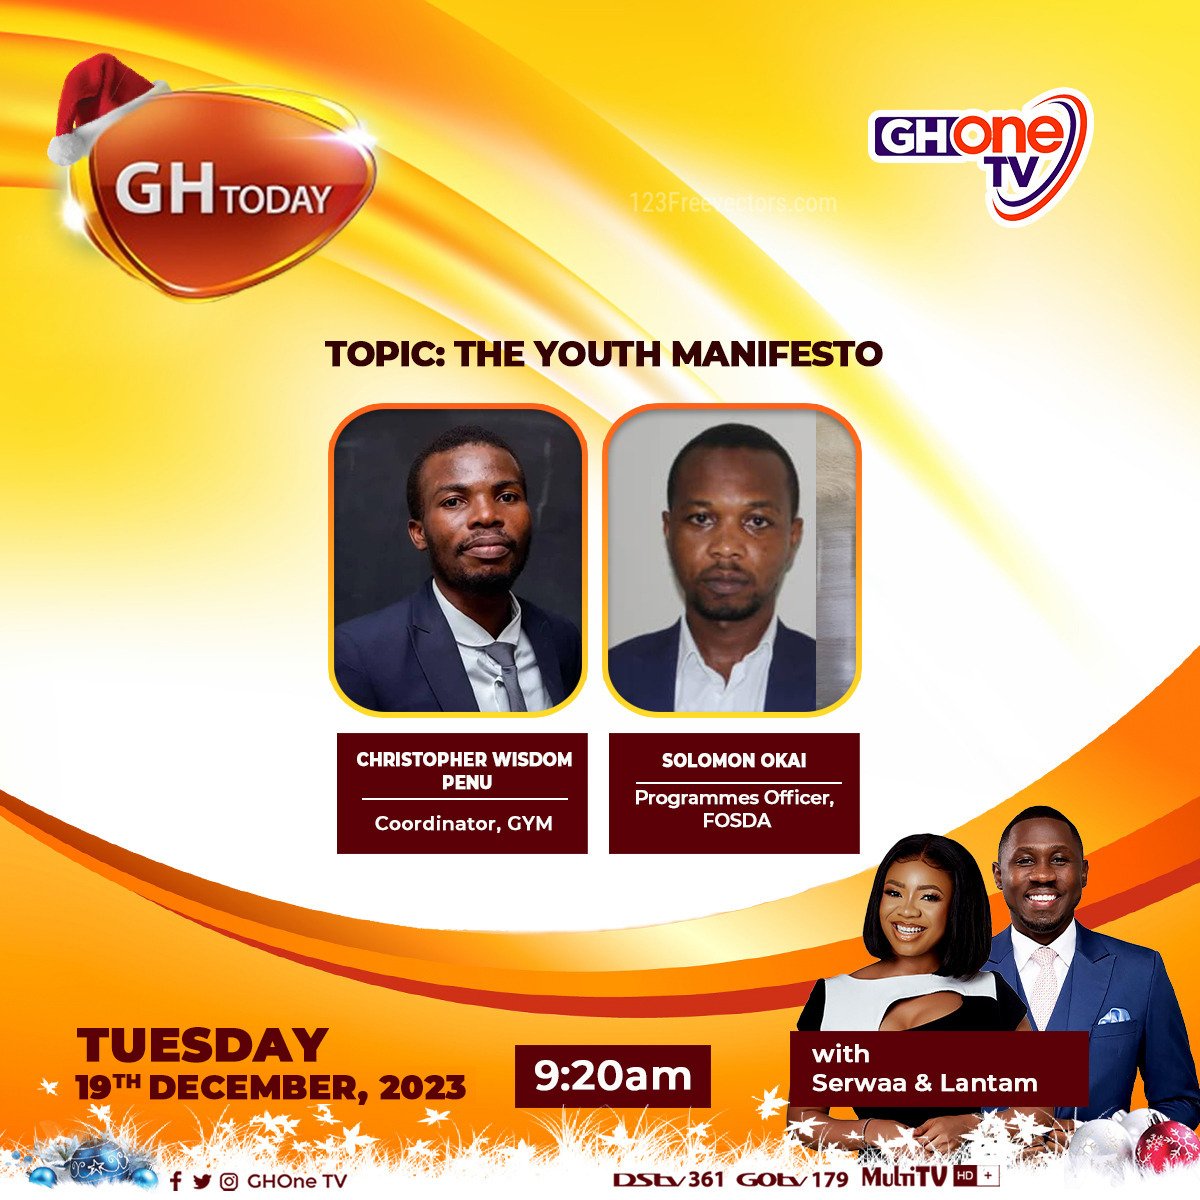 Make time to join this fruitful discussion on @ghonetv today at 9:20am for an insightful interaction on how Ghana's political parties can adopt and incorporate the Youth Manifesto in their mainstream policies. This is what @ActionAidGhana & partners stand for - youth empowerment.